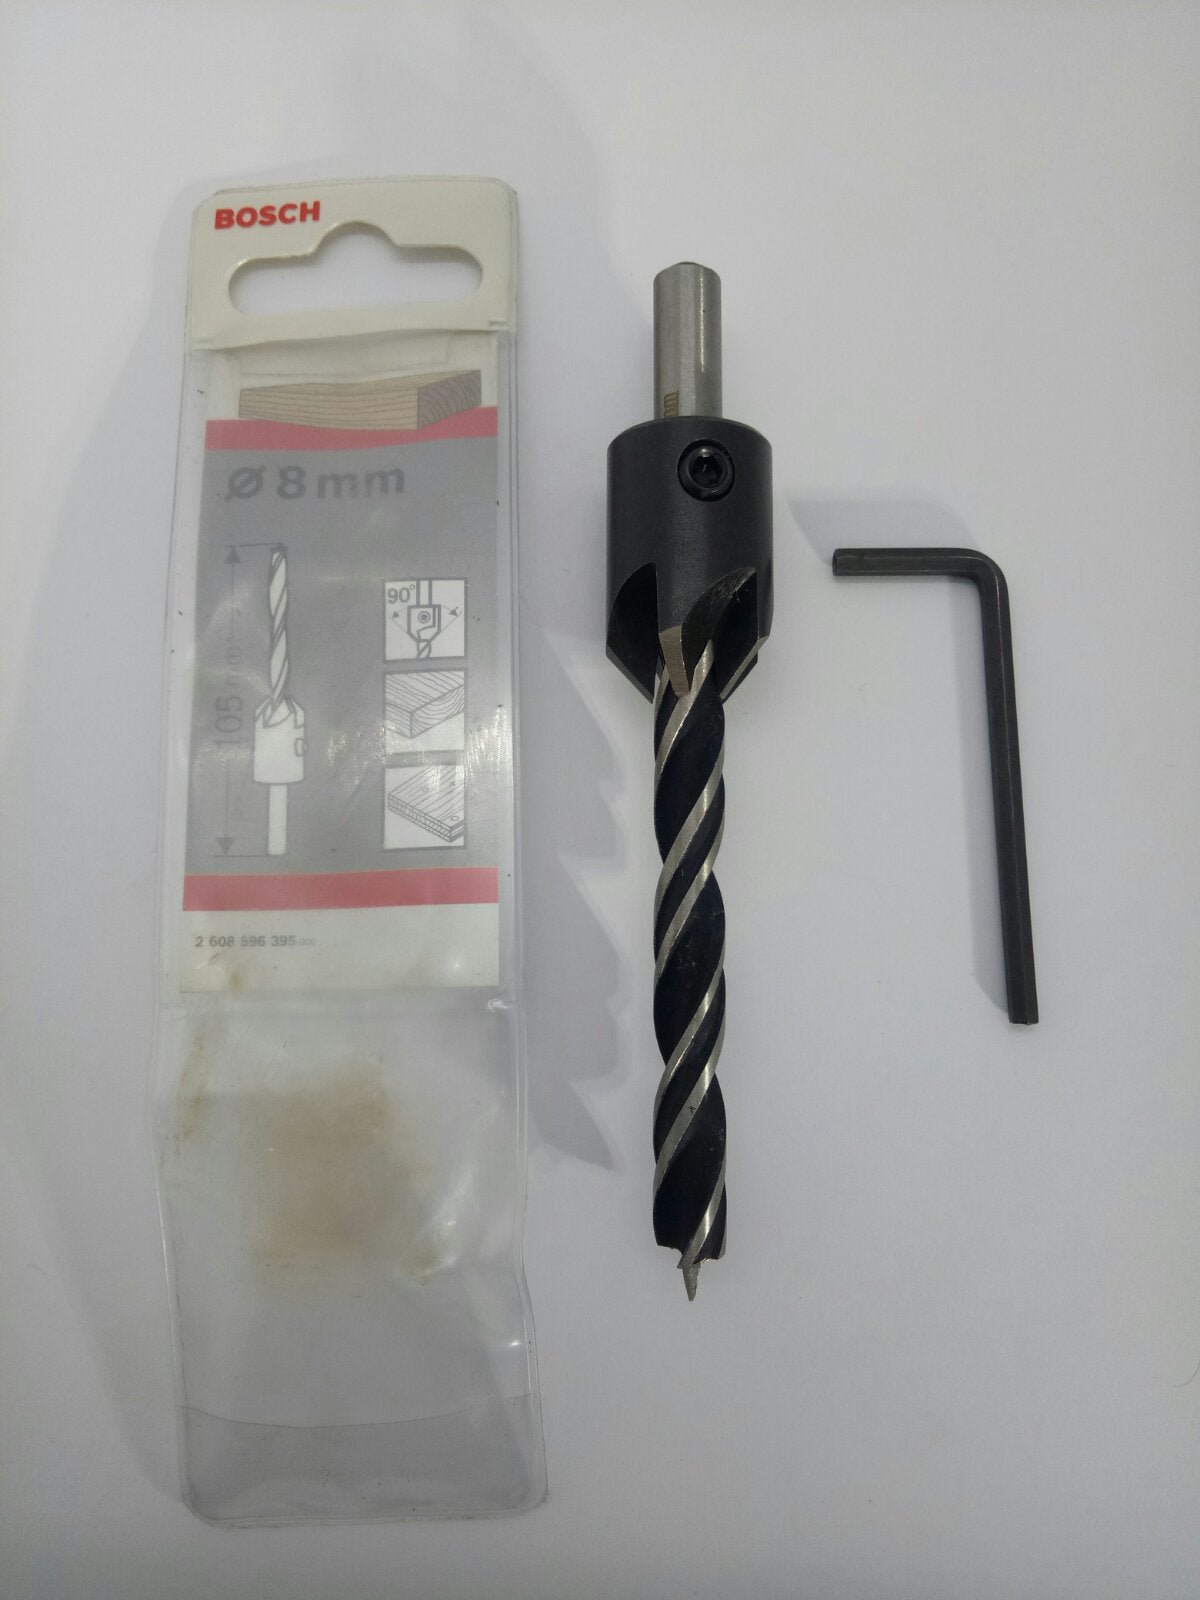 BOSCH 2608596395 Wood Drill Bit with Countersink 8mm